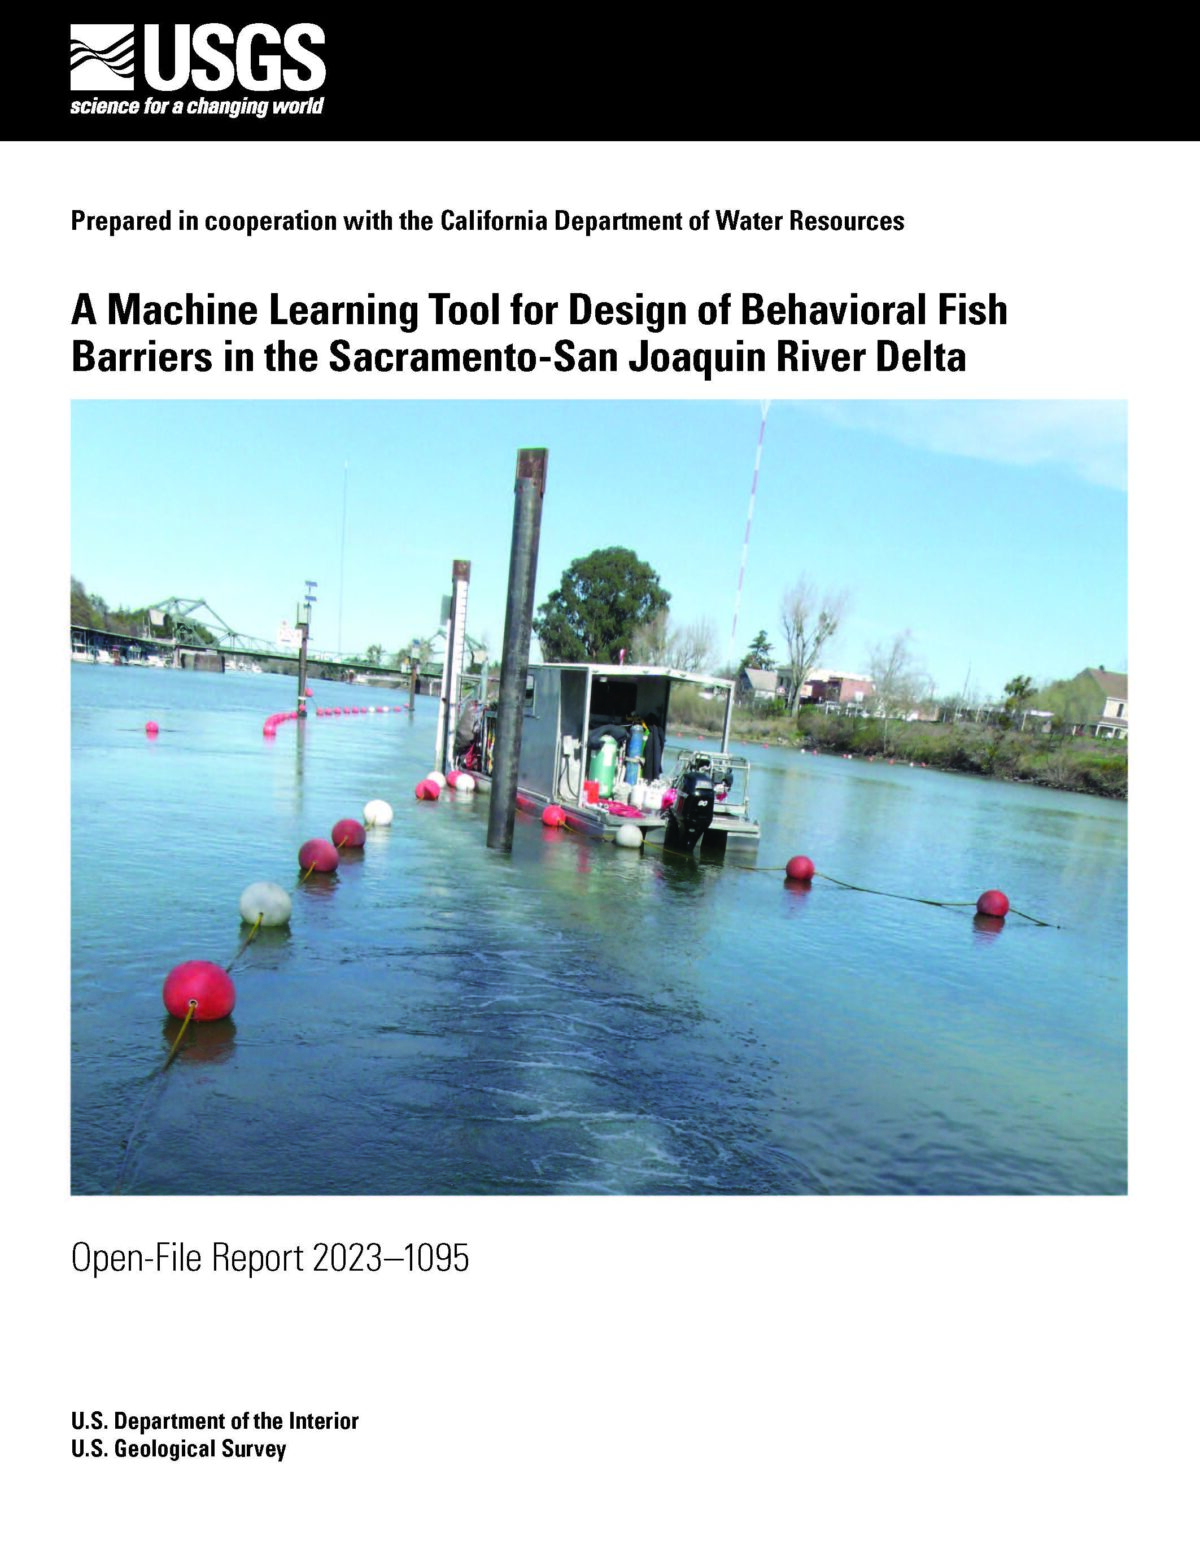 A Machine Learning Tool for Design of Behavioral Fish Barriers in the Sacramento-San Joaquin River Delta